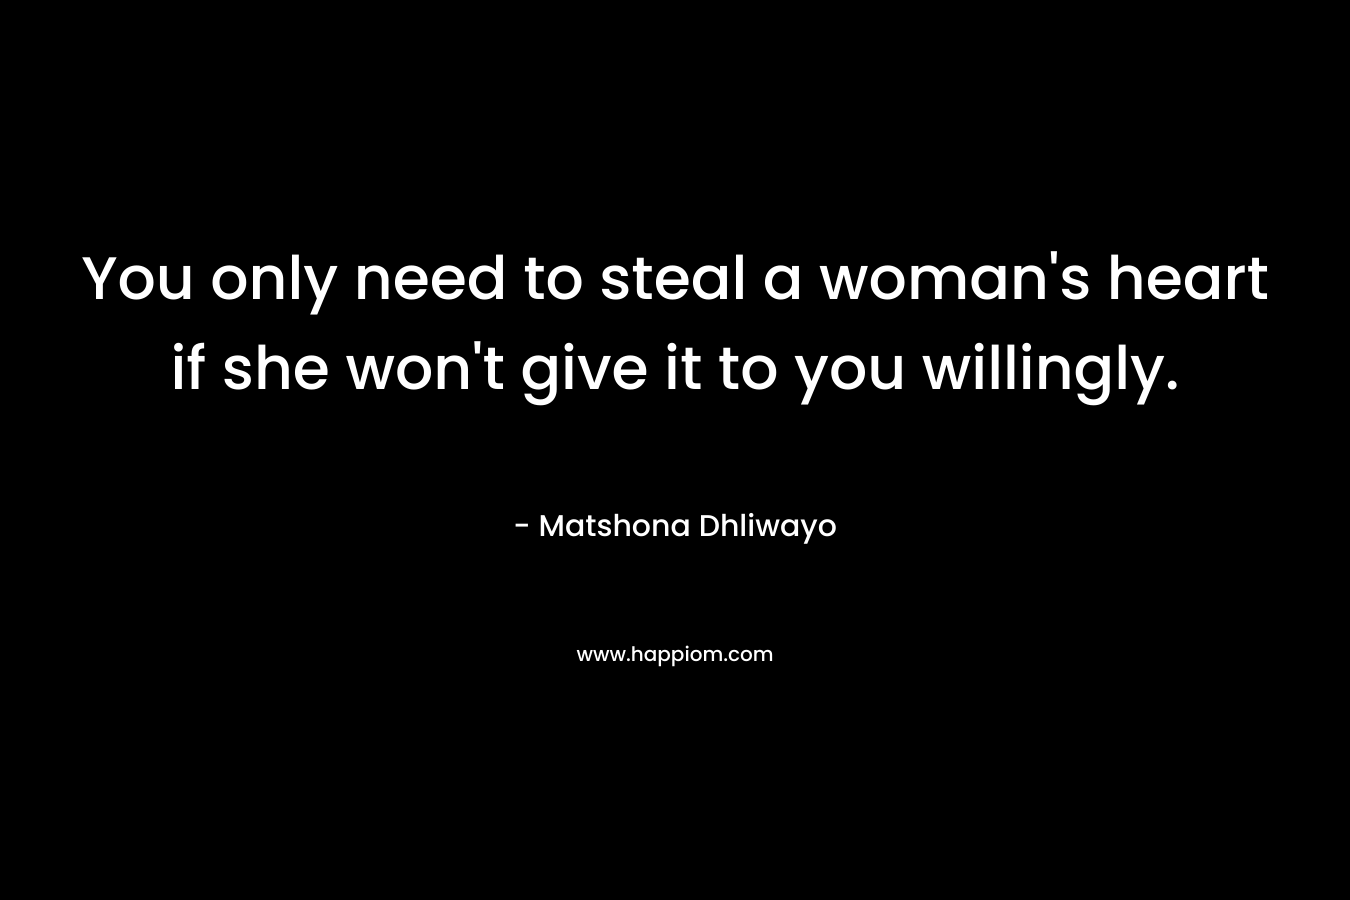 You only need to steal a woman’s heart if she won’t give it to you willingly. – Matshona Dhliwayo